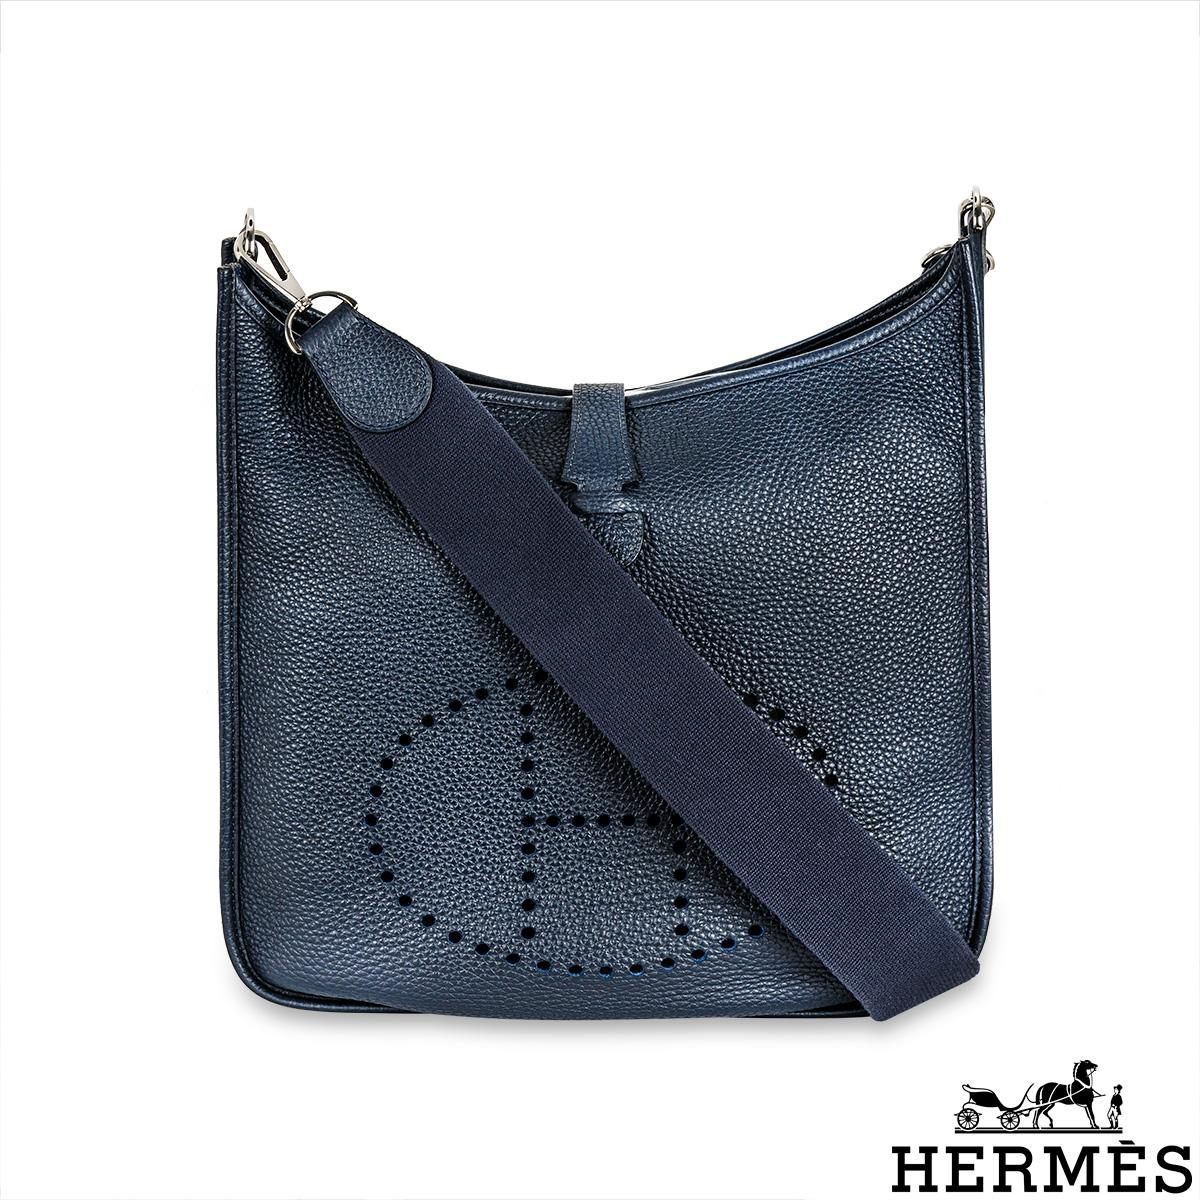 A lovely Hermès Evelyne GM handbag. The exterior of this Evelyne bag is crafted from Bleu Nuit Taurillon Clemence leather complemented with palladium hardware and tonal stitching. It features a perforated 